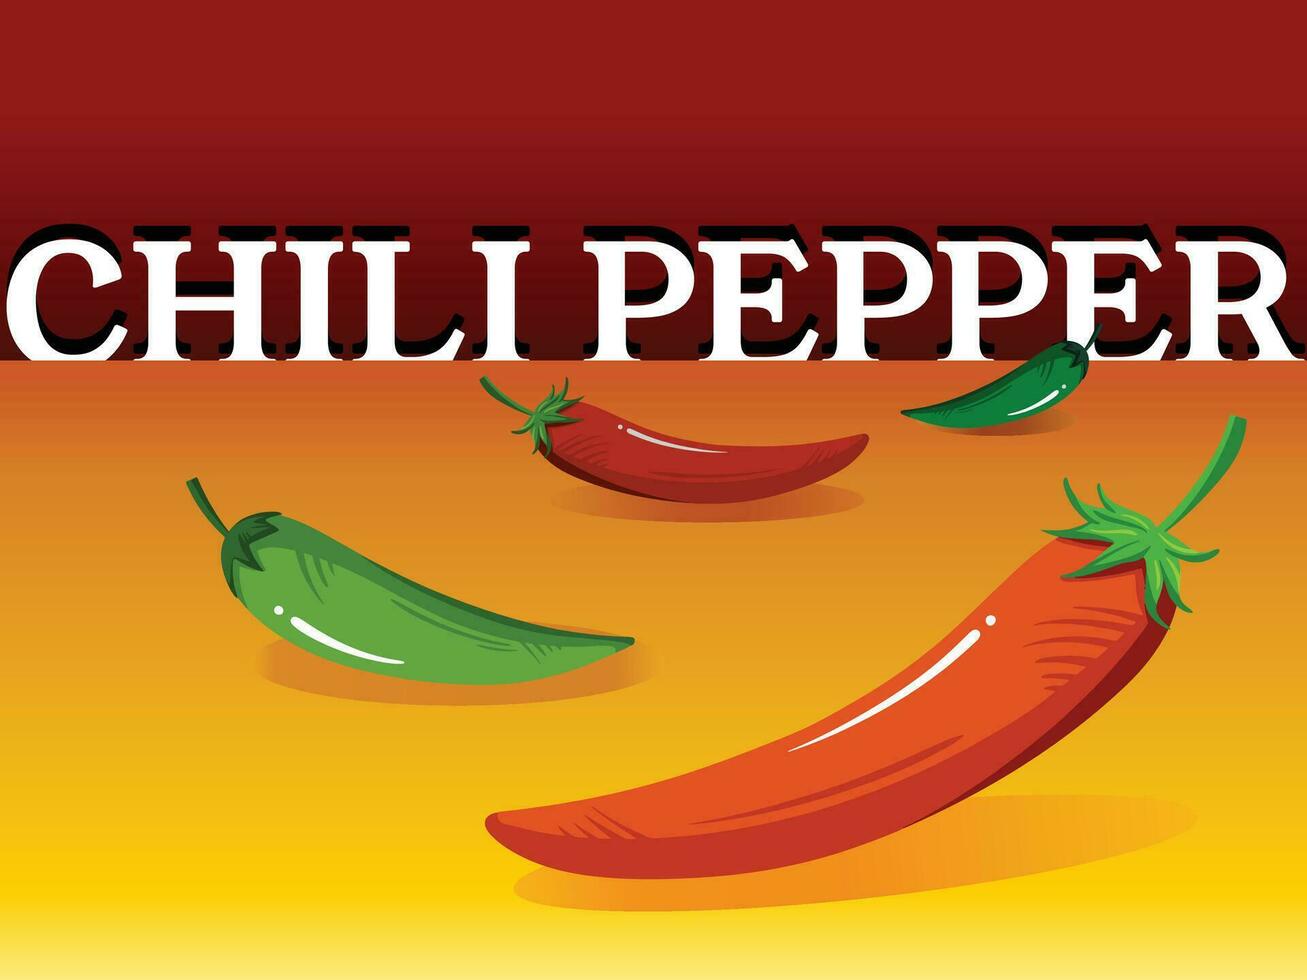 Hot and spicy chili peppers vector illustration drawing isolated on gradient yellow flooring and red background wall. Colorful and modern food ingredient label banner design.